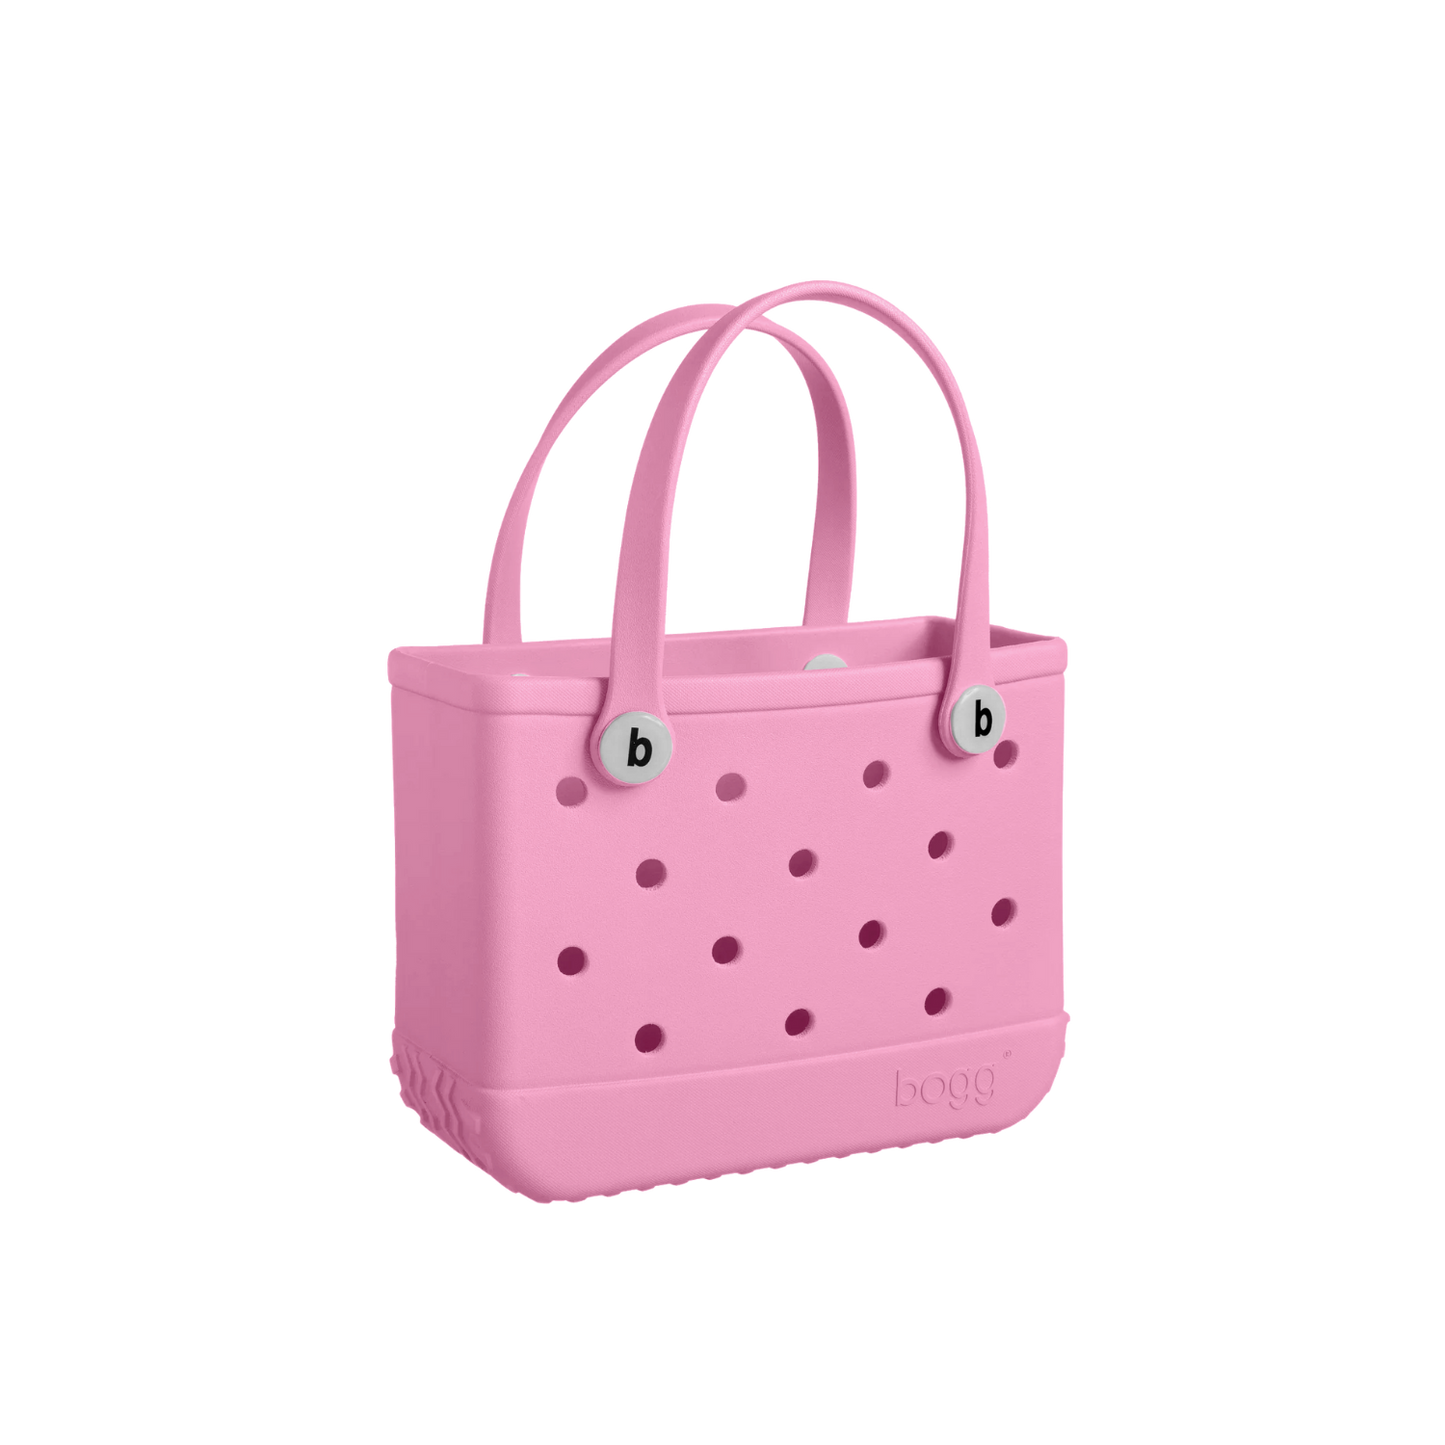 Bitty Bogg® Bag - blowing PINK bubbles